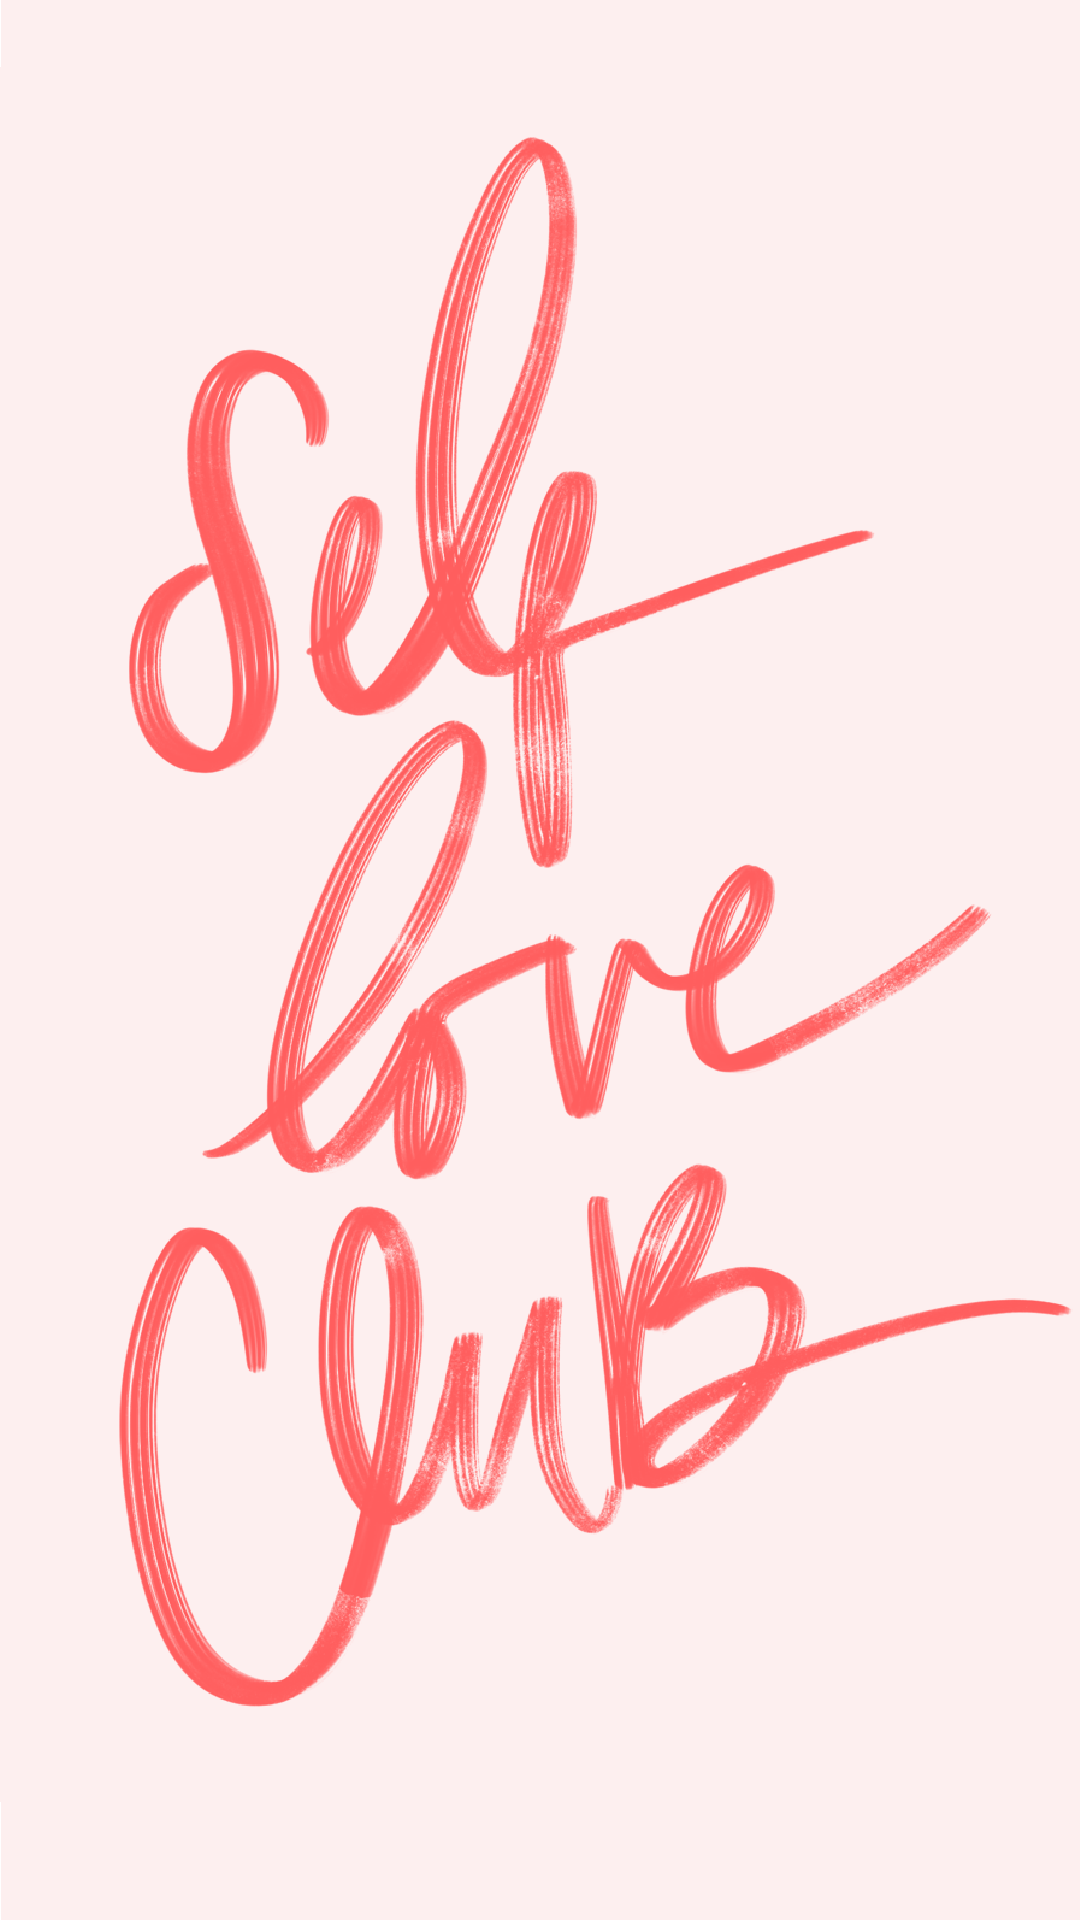 Self Love Wallpaper Emmygination. Self love quotes, Quote background, New quotes